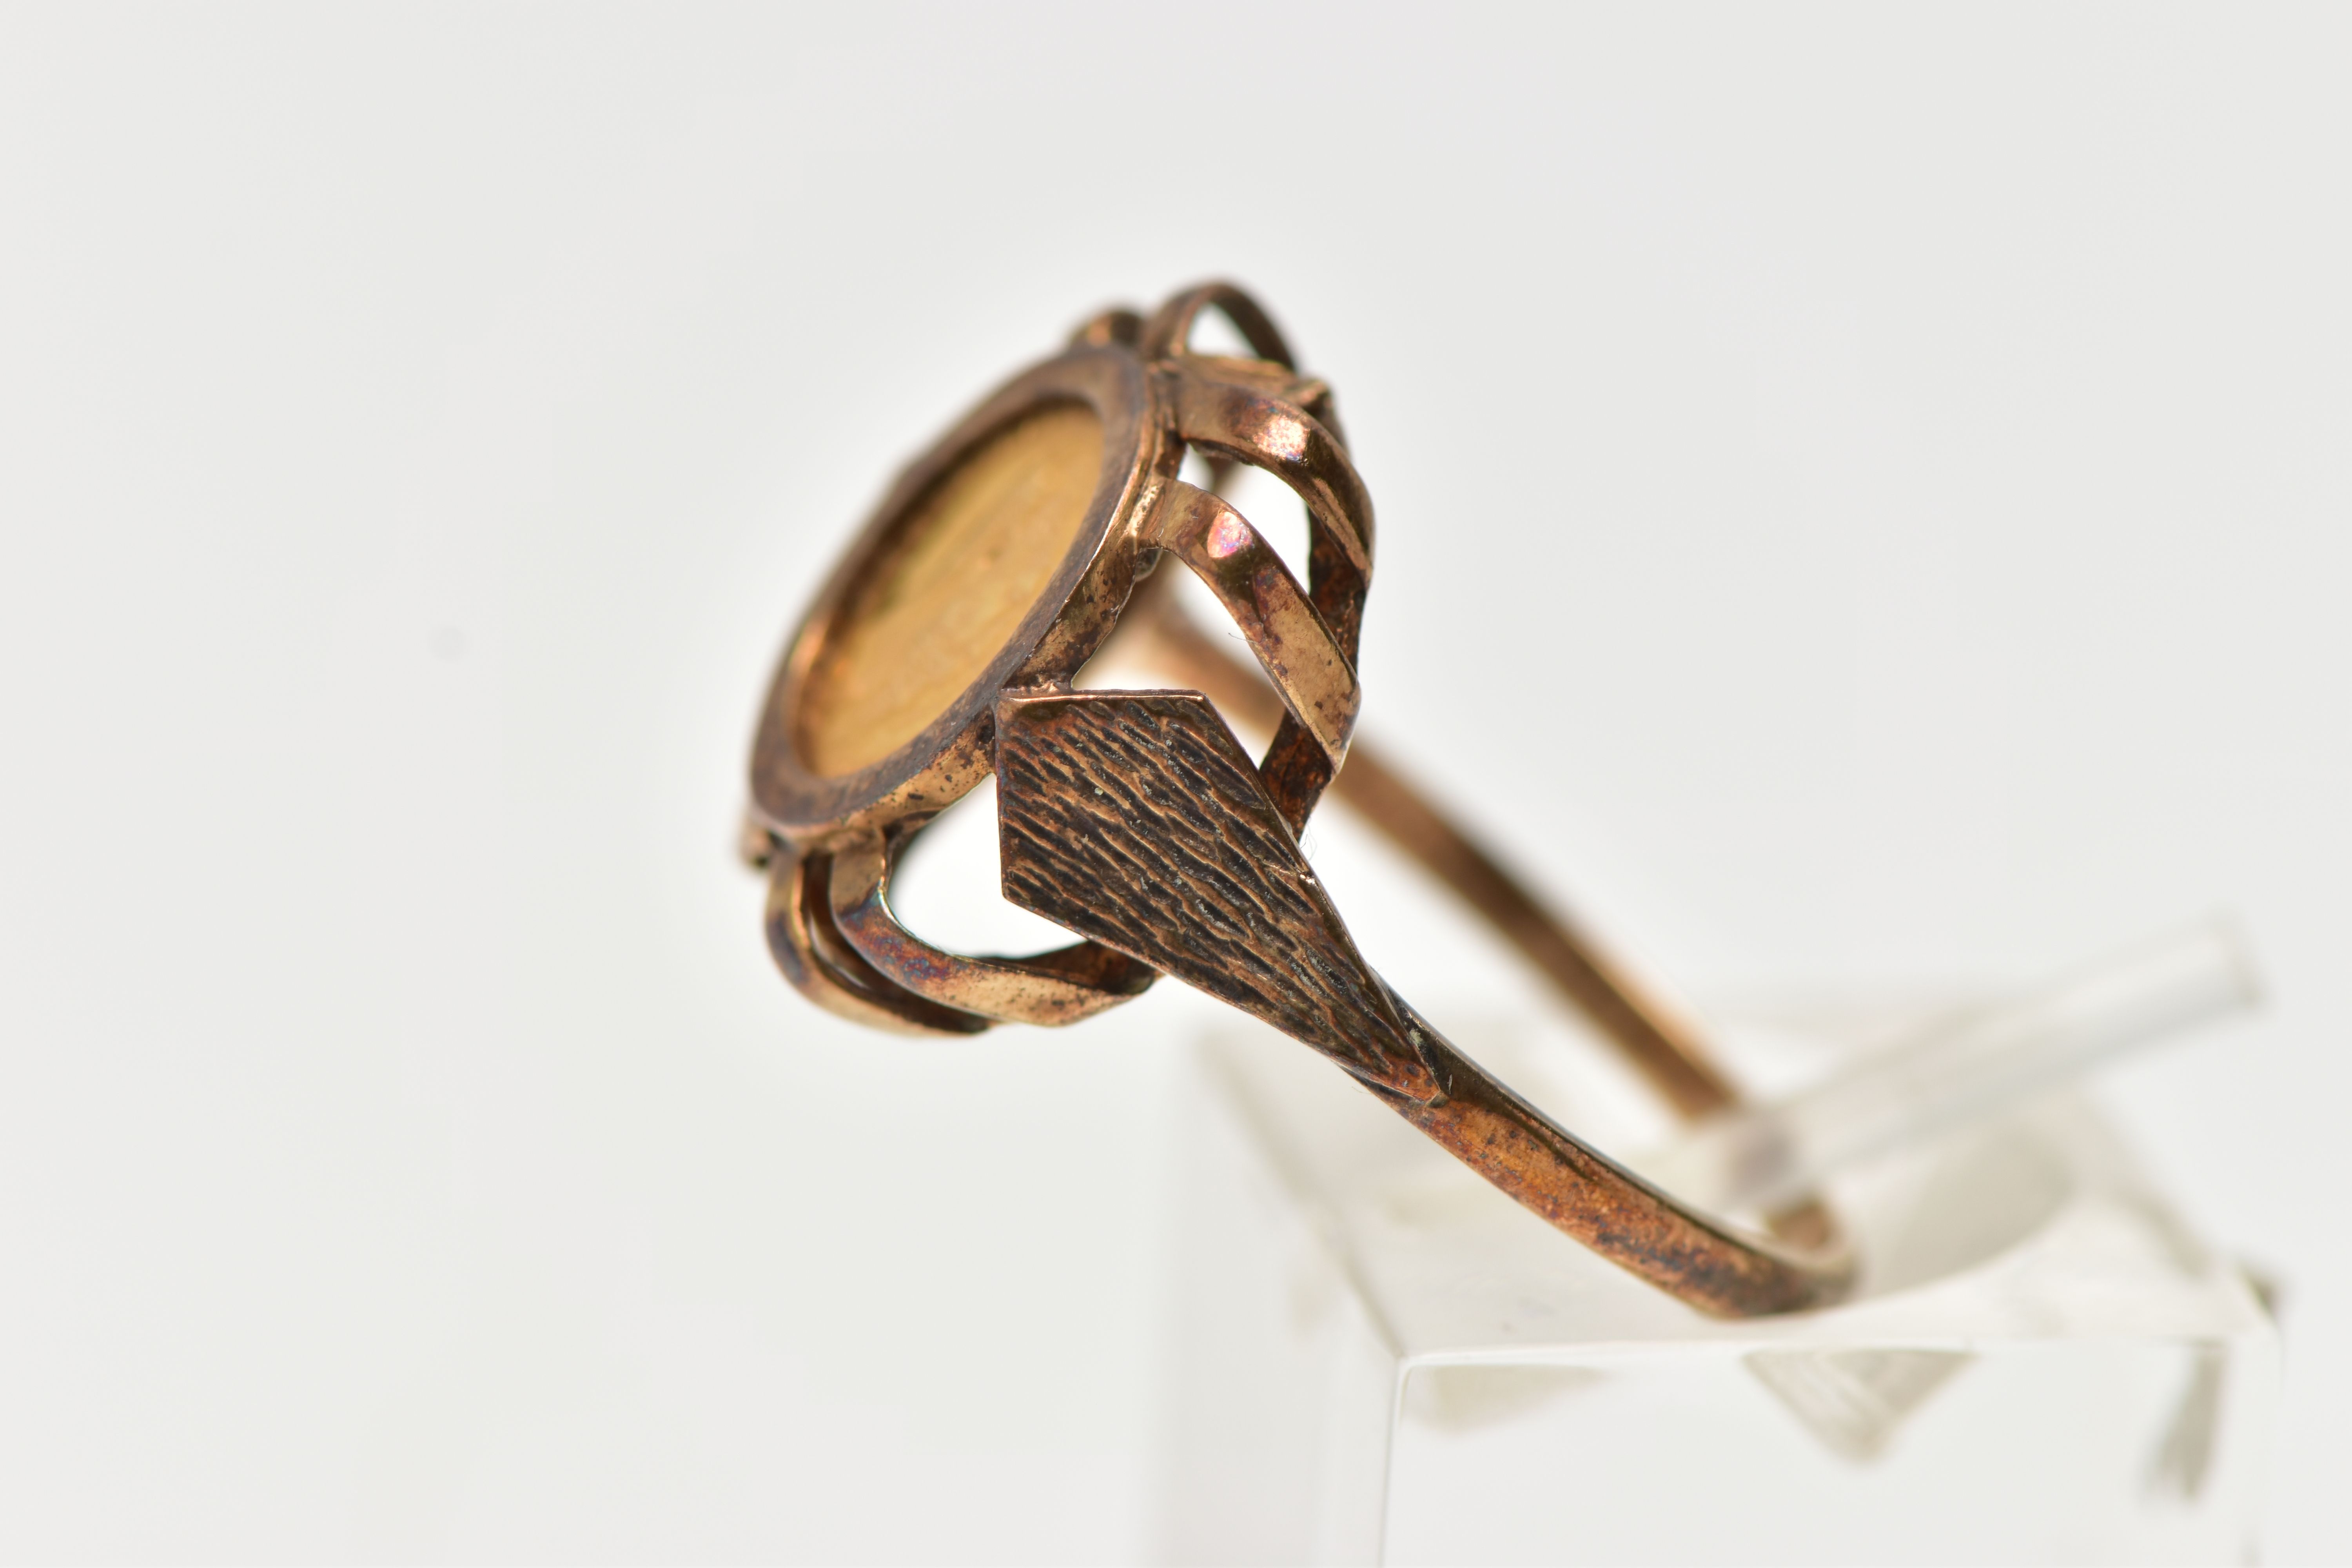 A 9CT YELLOW GOLD COIN RING WITH MEXICAN COIN, the ring set with a Mexican Maximiliano coin, dated - Image 2 of 5